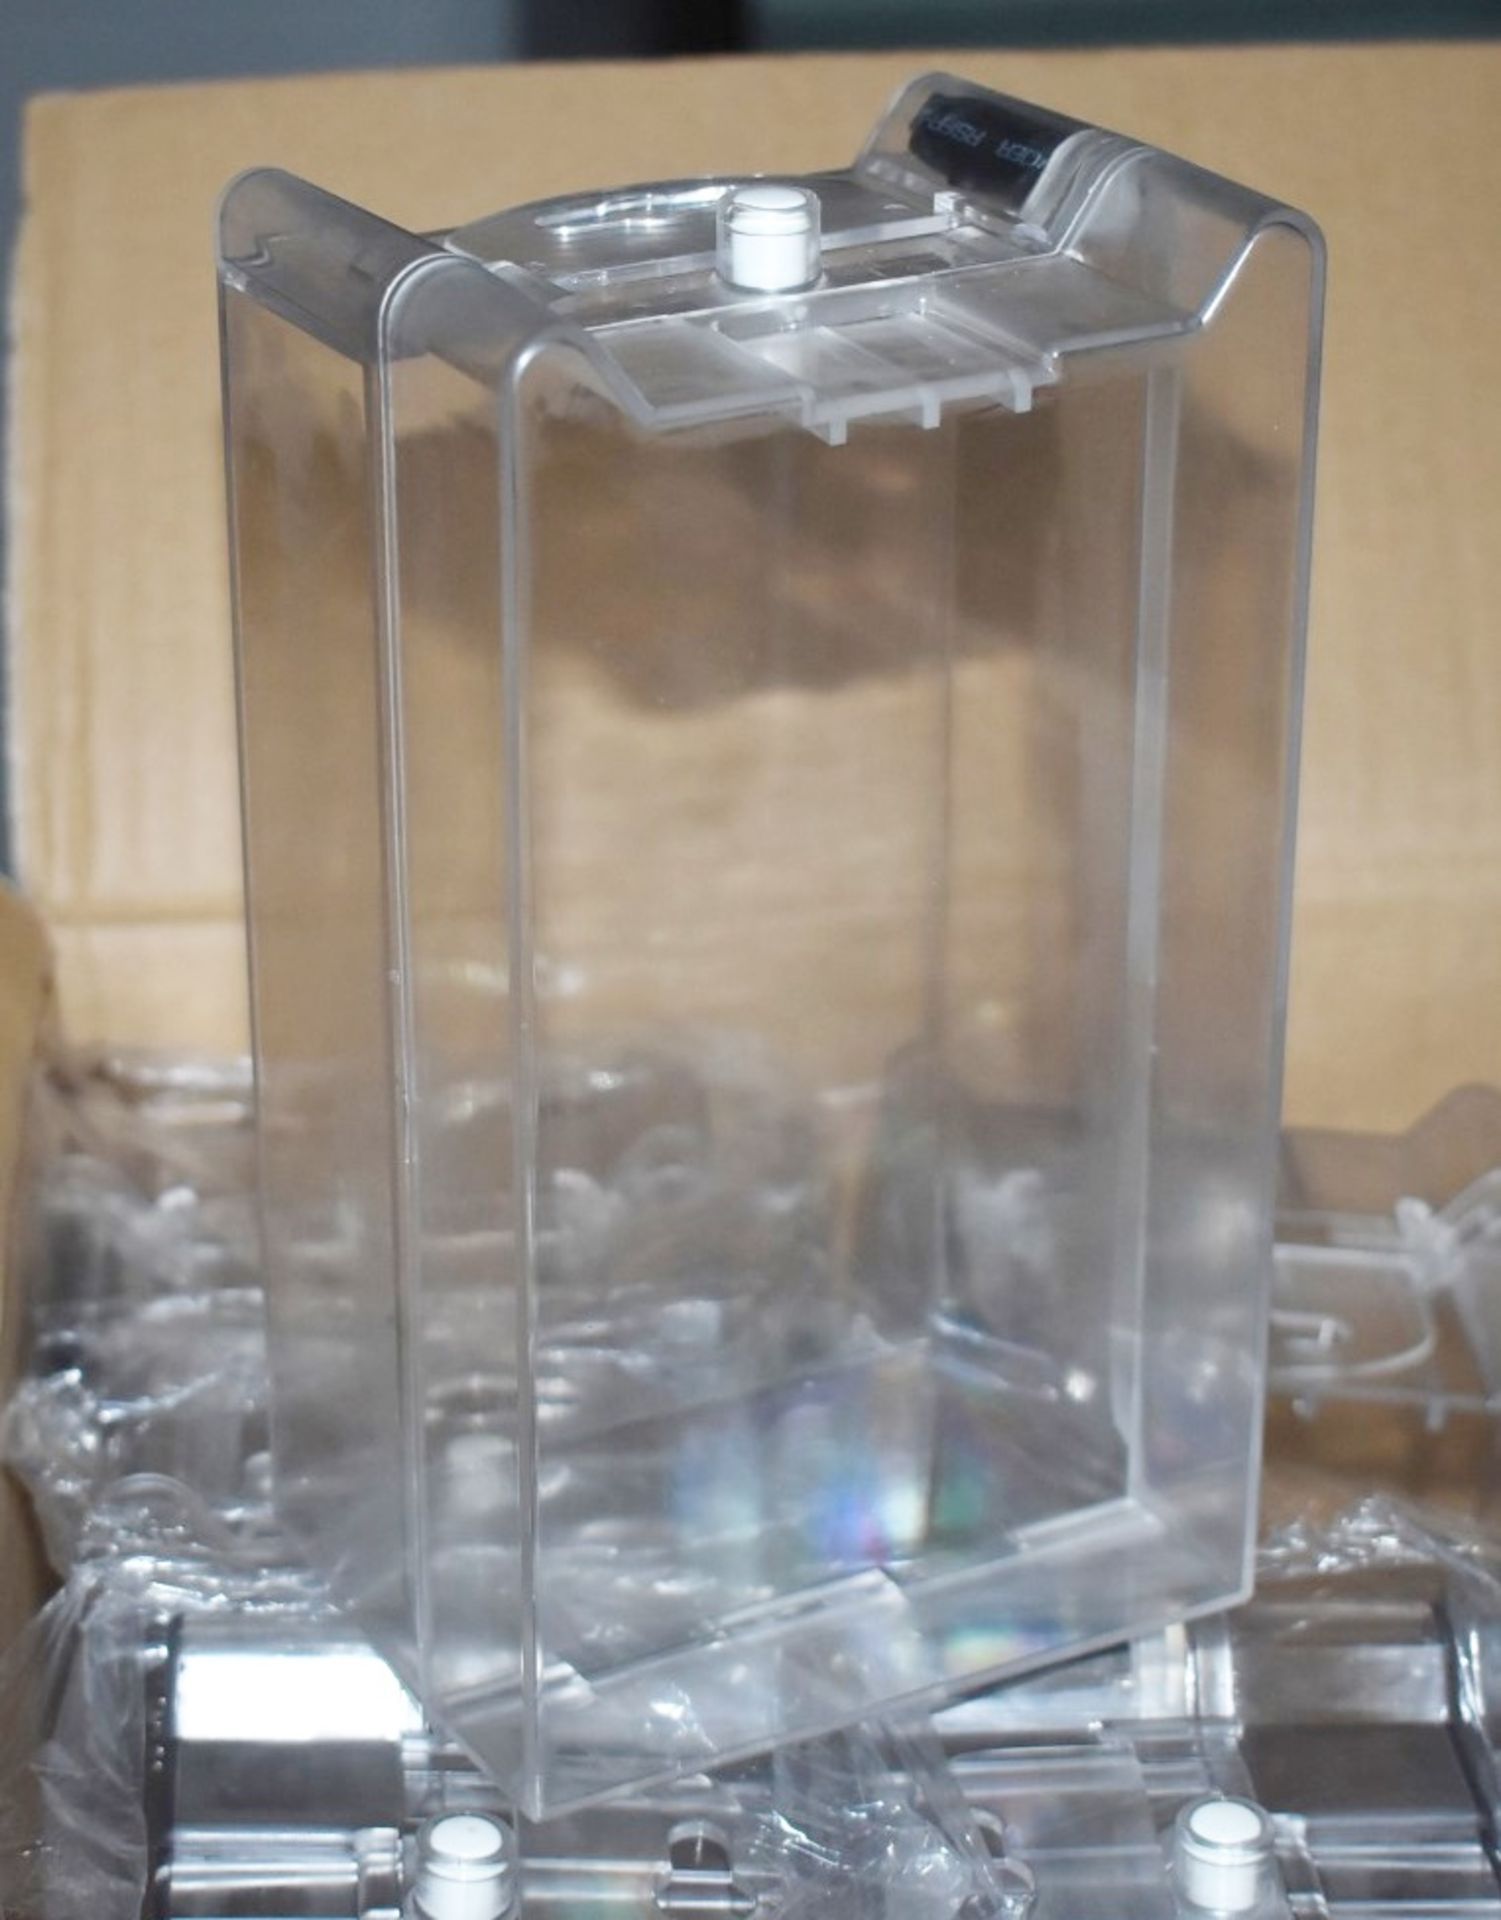 40 x Catalyst Clear Acrylic Retail Security Safer Cases With RF Tags and Hanging Tags - Brand New - Image 2 of 8